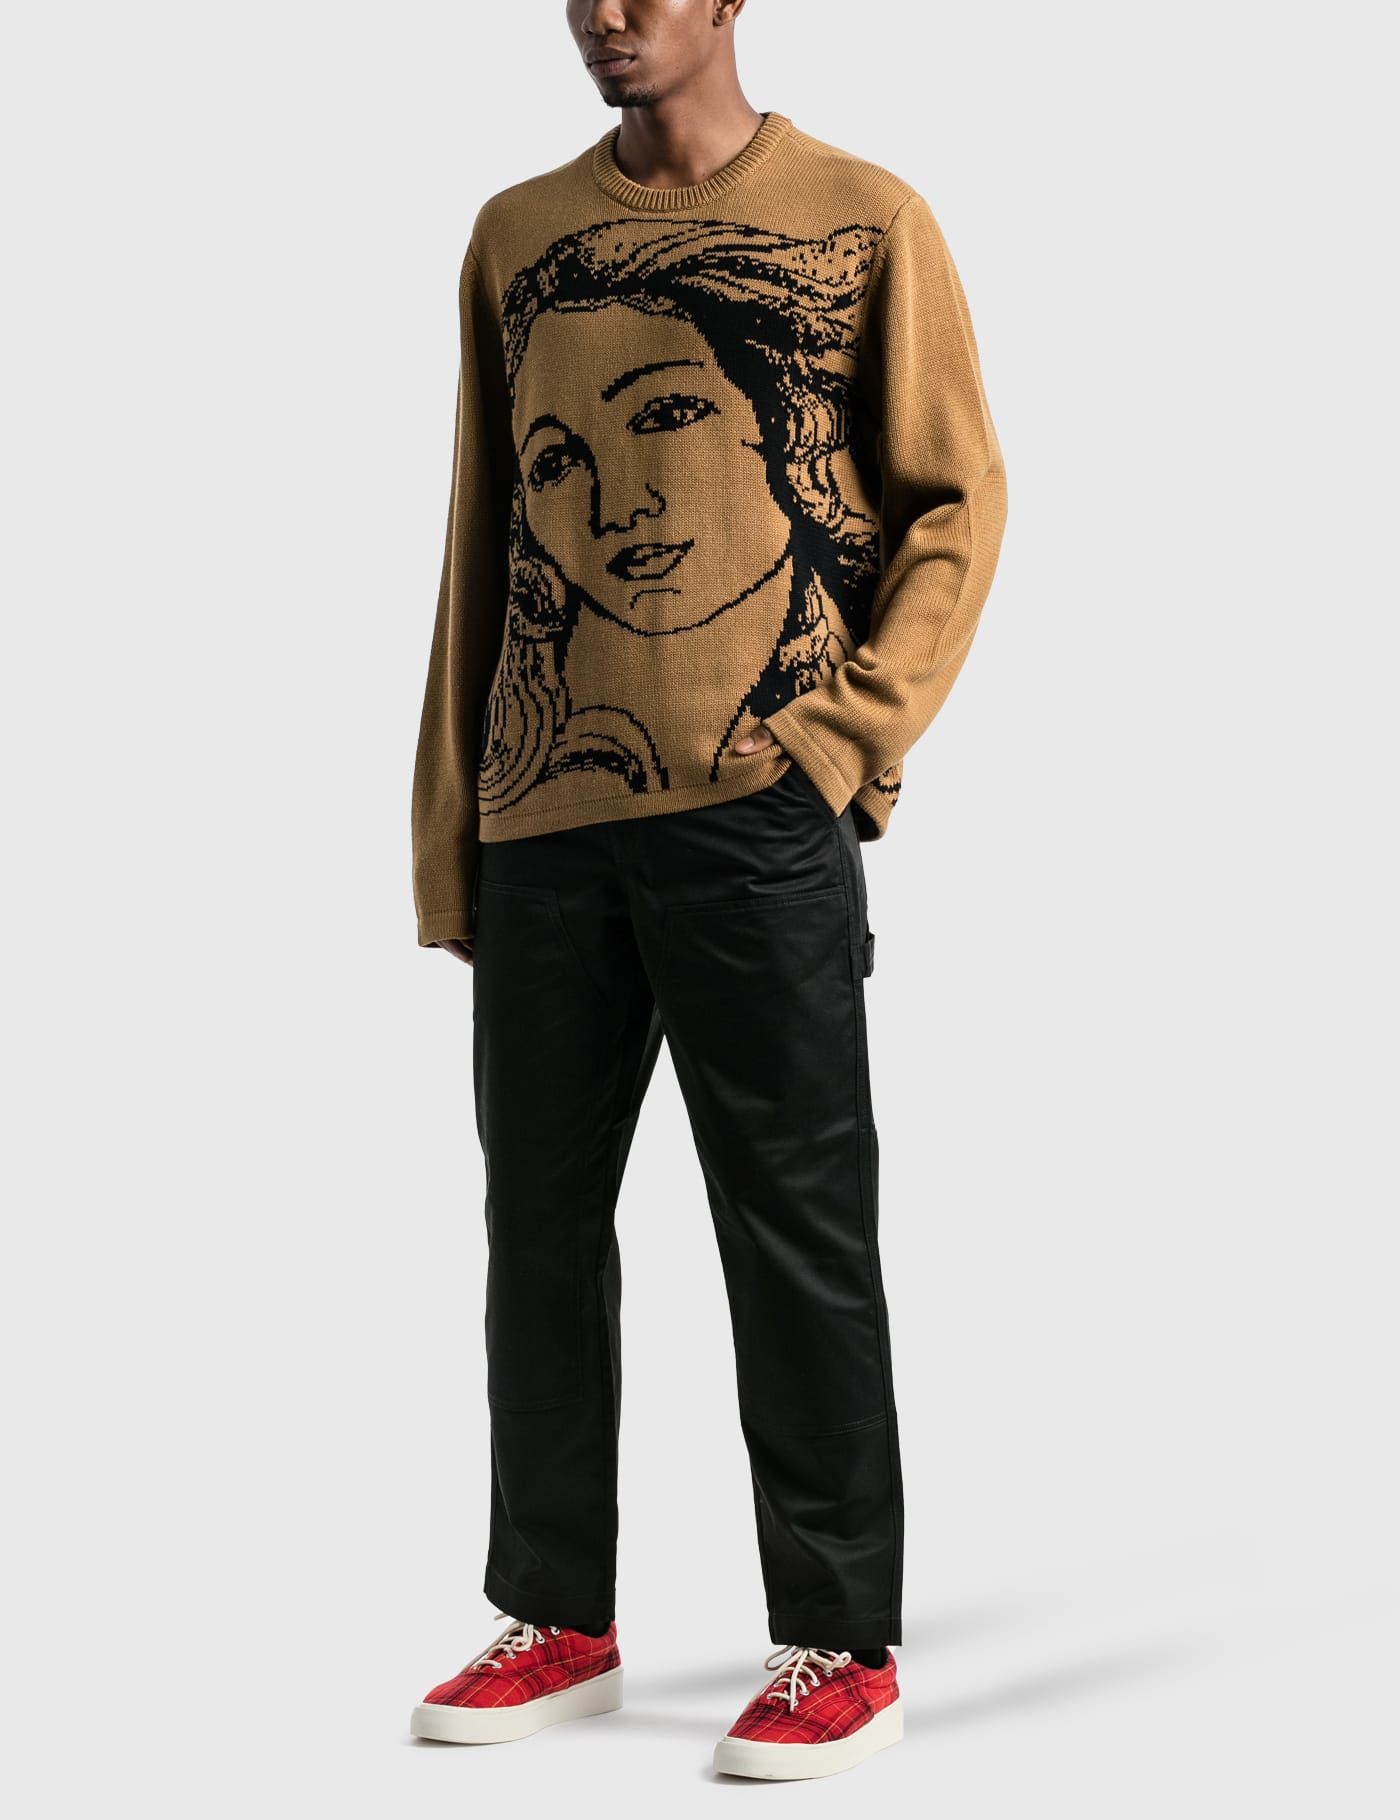 Stüssy - Venus Sweater | HBX - Globally Curated Fashion and